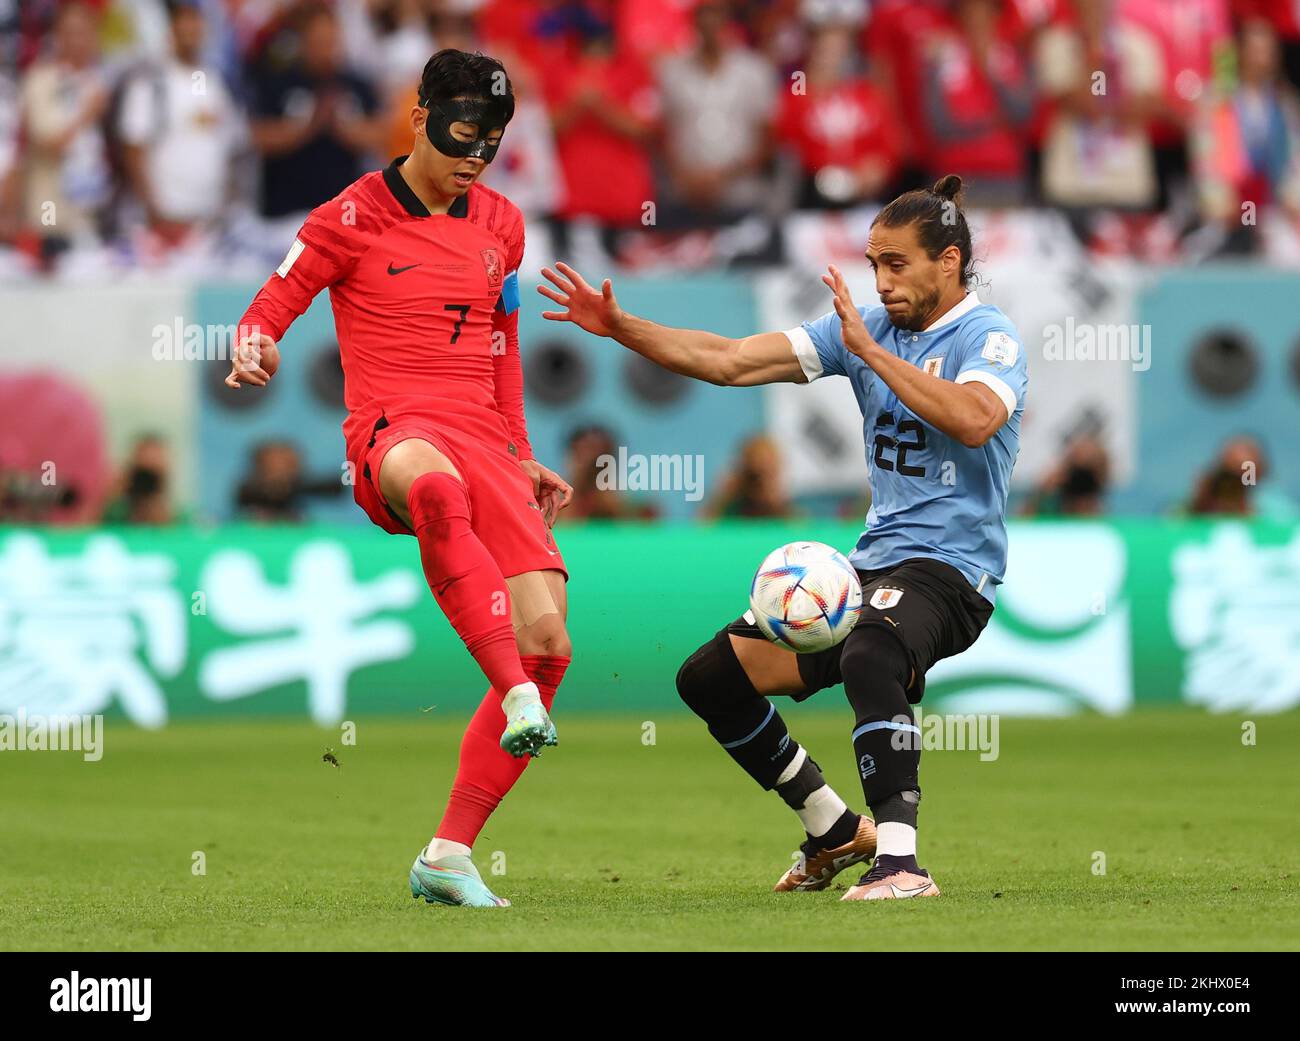 Ar Rayyan, Qatar. 24th Nov, 2022. Heung min Son of Korea challenged by Martin Caceres of Uruguay during the FIFA World Cup 2022 match at Education City Stadium, Ar Rayyan. Picture credit should read: David Klein/Sportimage/Alamy Live News/Alamy Live News/Alamy Live News/Alamy Live News Credit: Sportimage/Alamy Live News Stock Photo